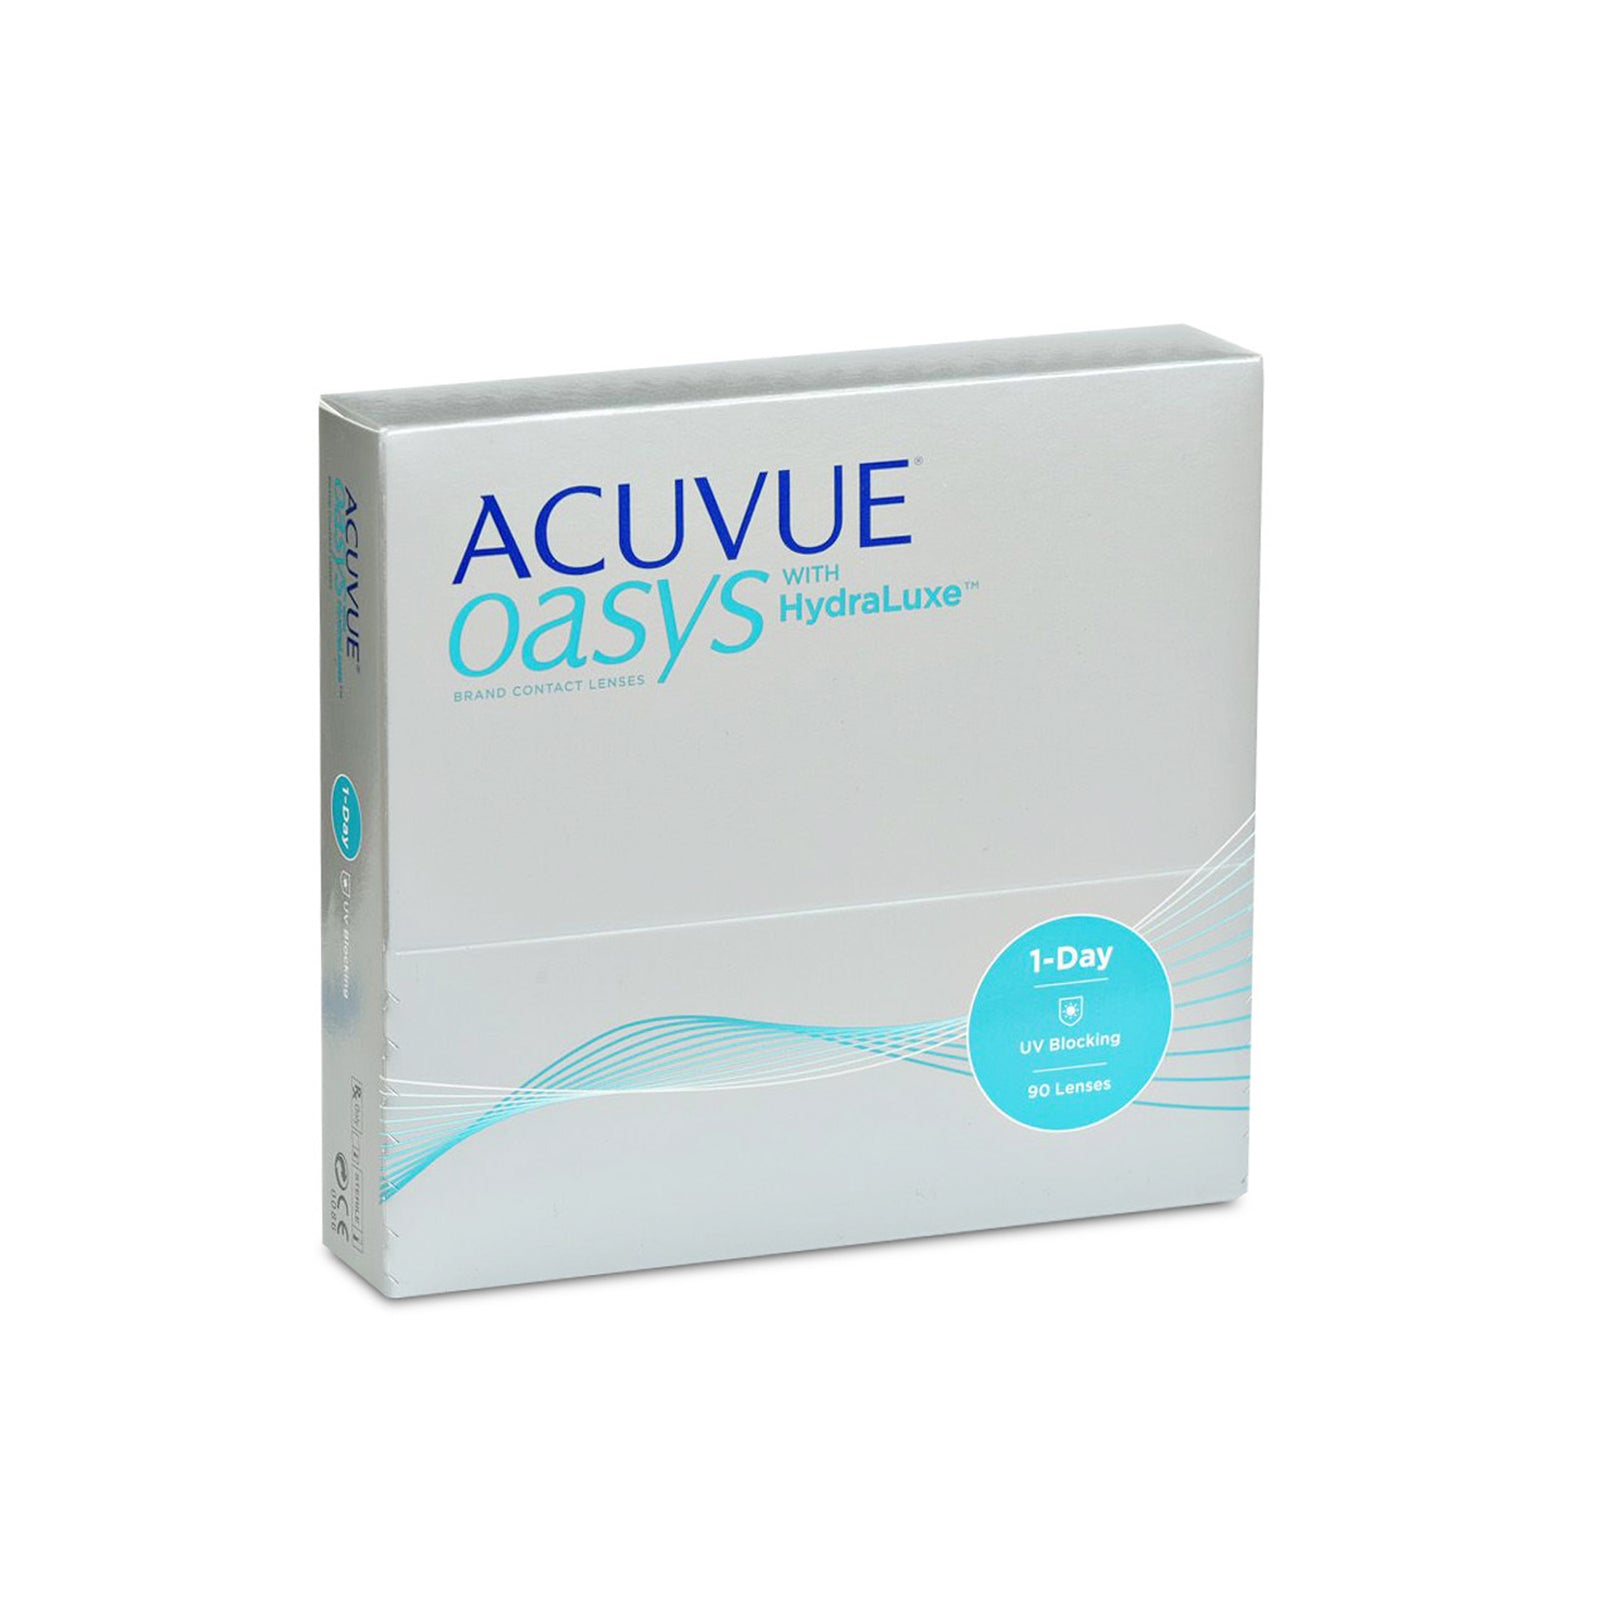 Acuvue : Acuvue Oasys 1 Day with HydraLuxe - Daily - 4 Month Supply